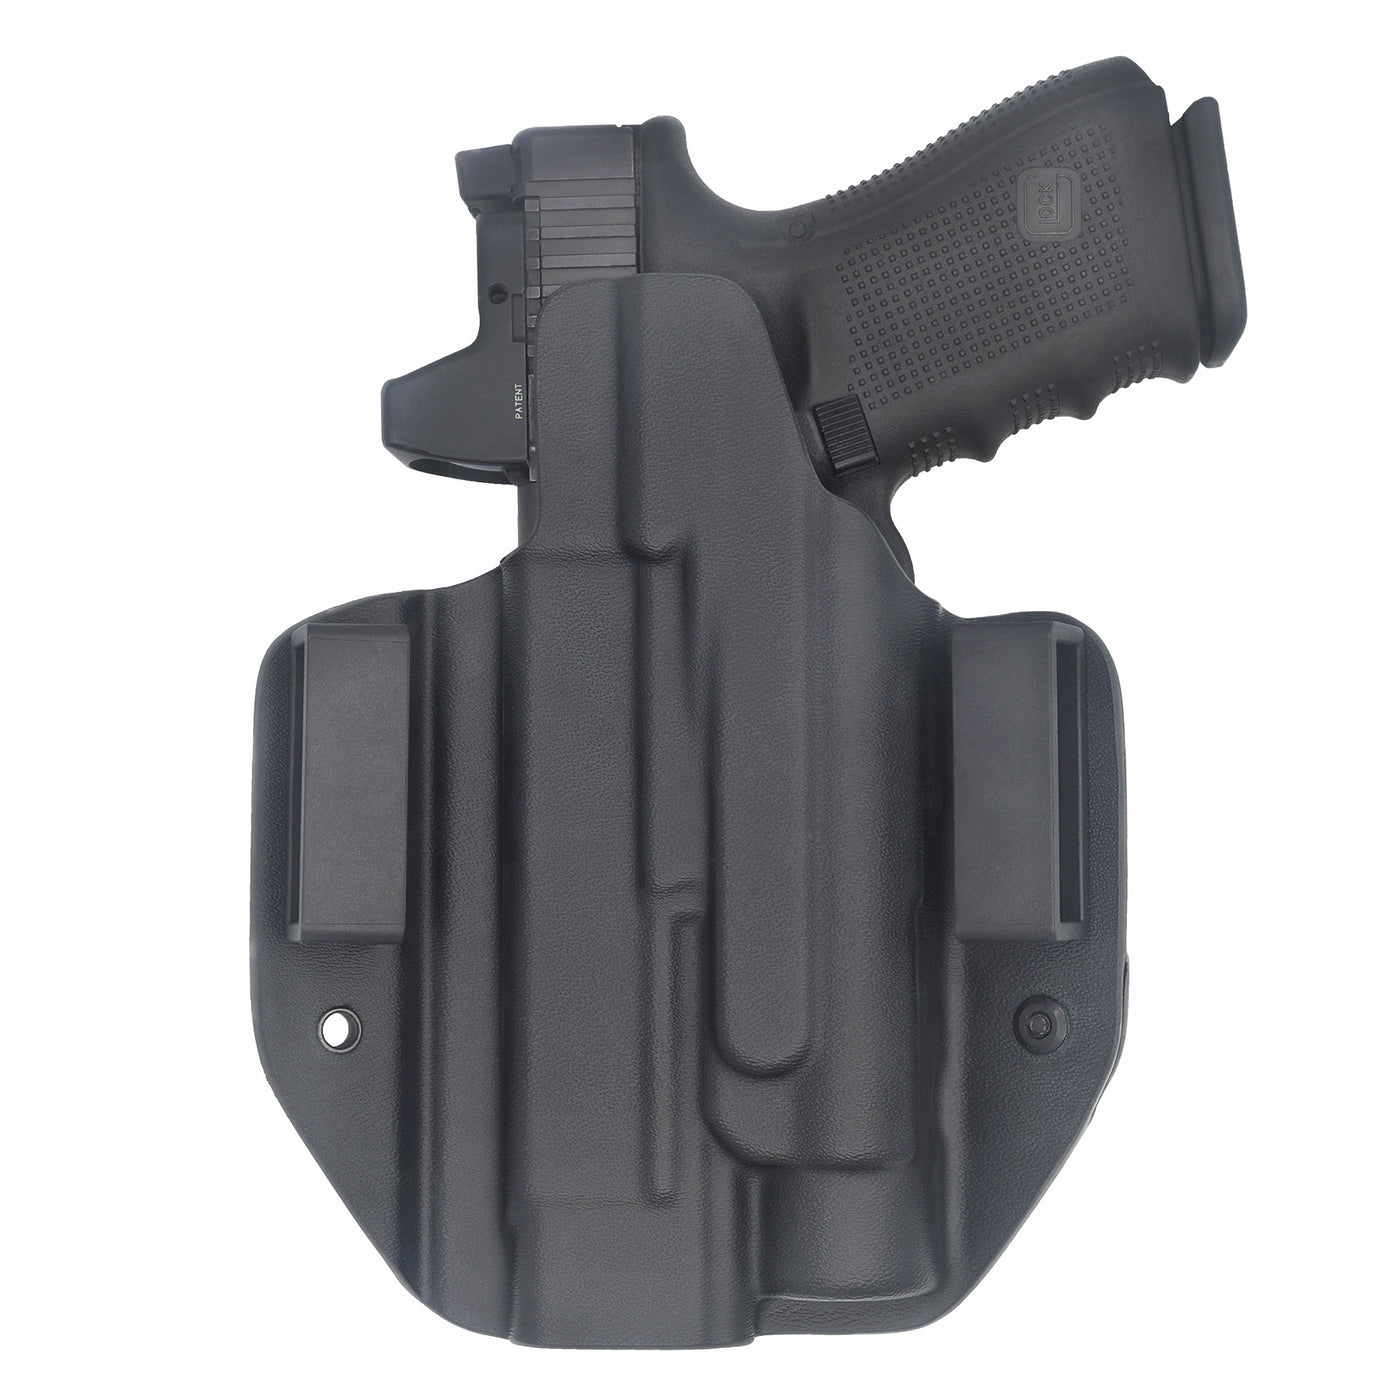 C&G Holsters quickship OWB Tactical CZ P10/c Streamlight TLR-1 in holstered position back view